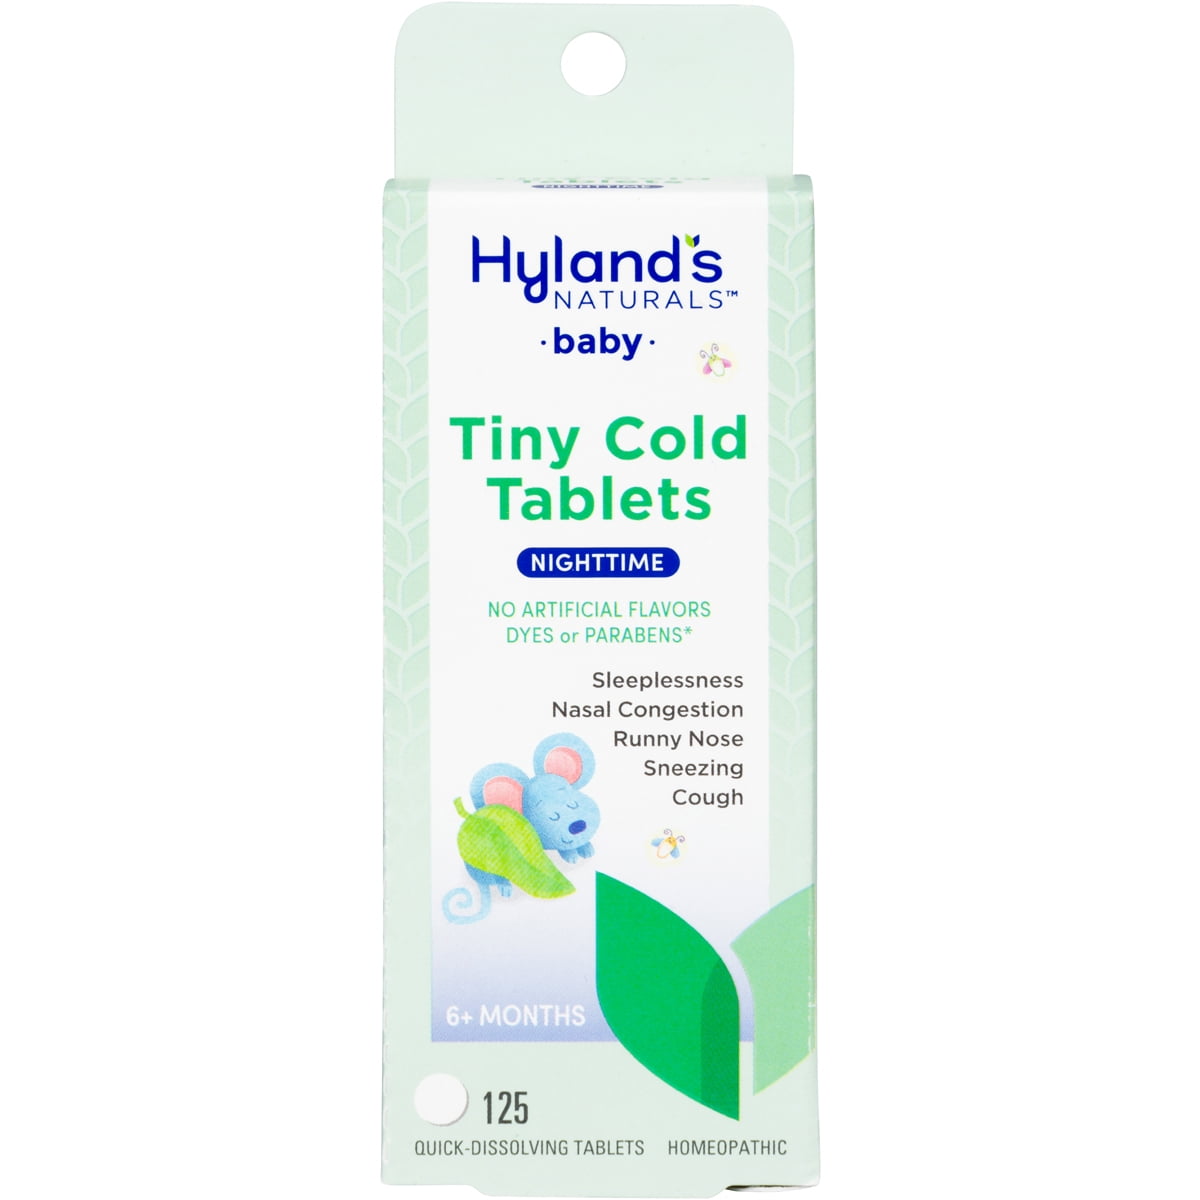 Hyland's Naturals Baby Cold Symptoms Relief Nighttime Tiny Cold Tablets, 125 Quick-Dissolving Tablets